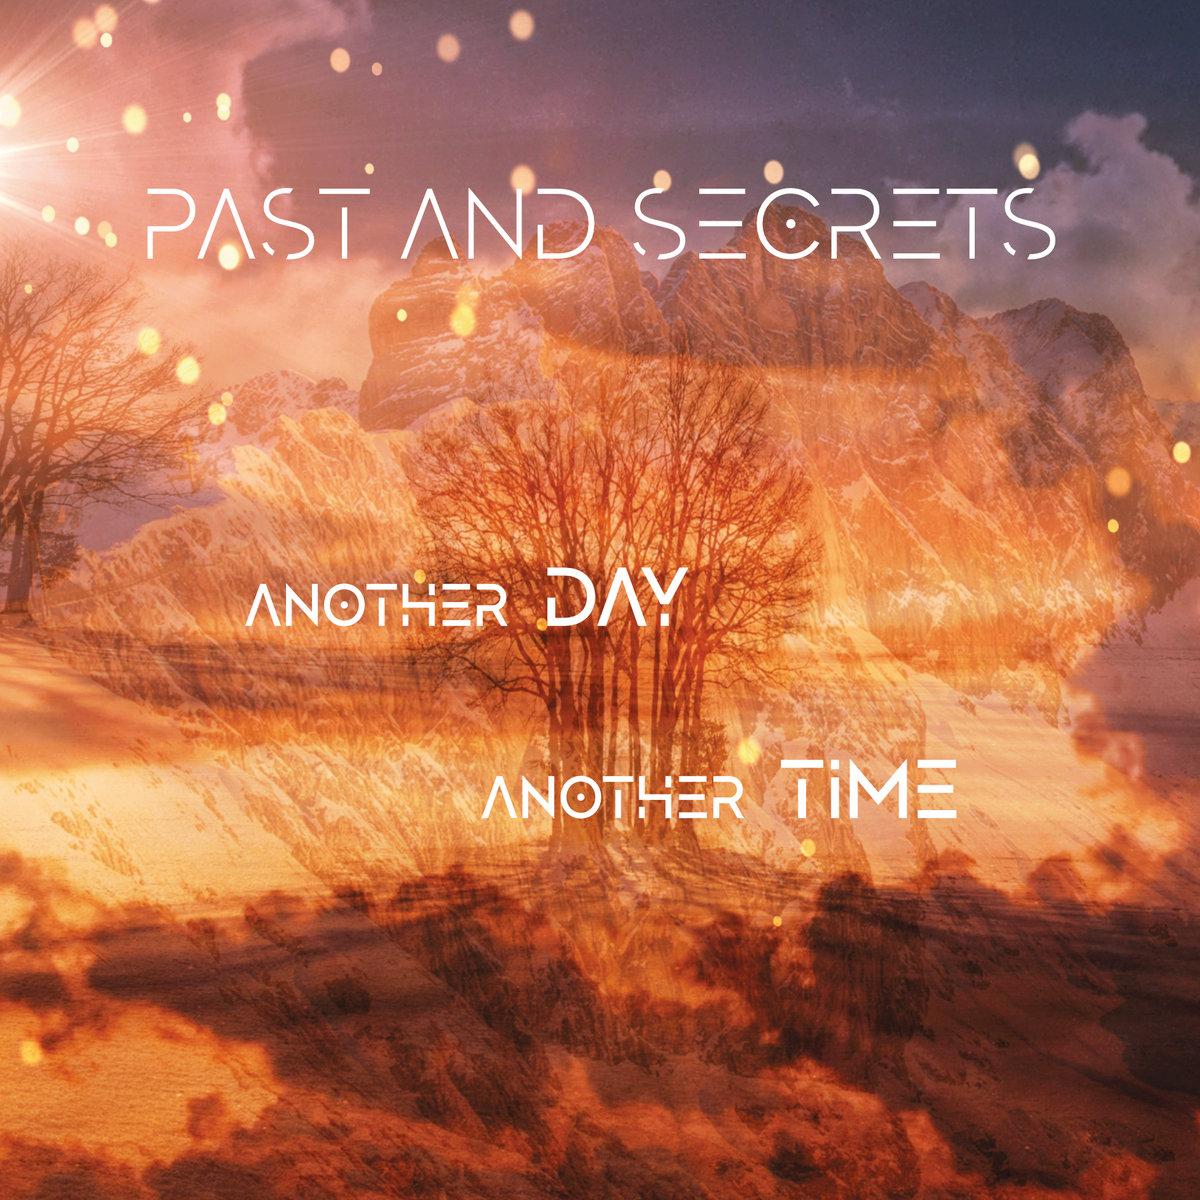 Past and secrets another day another time